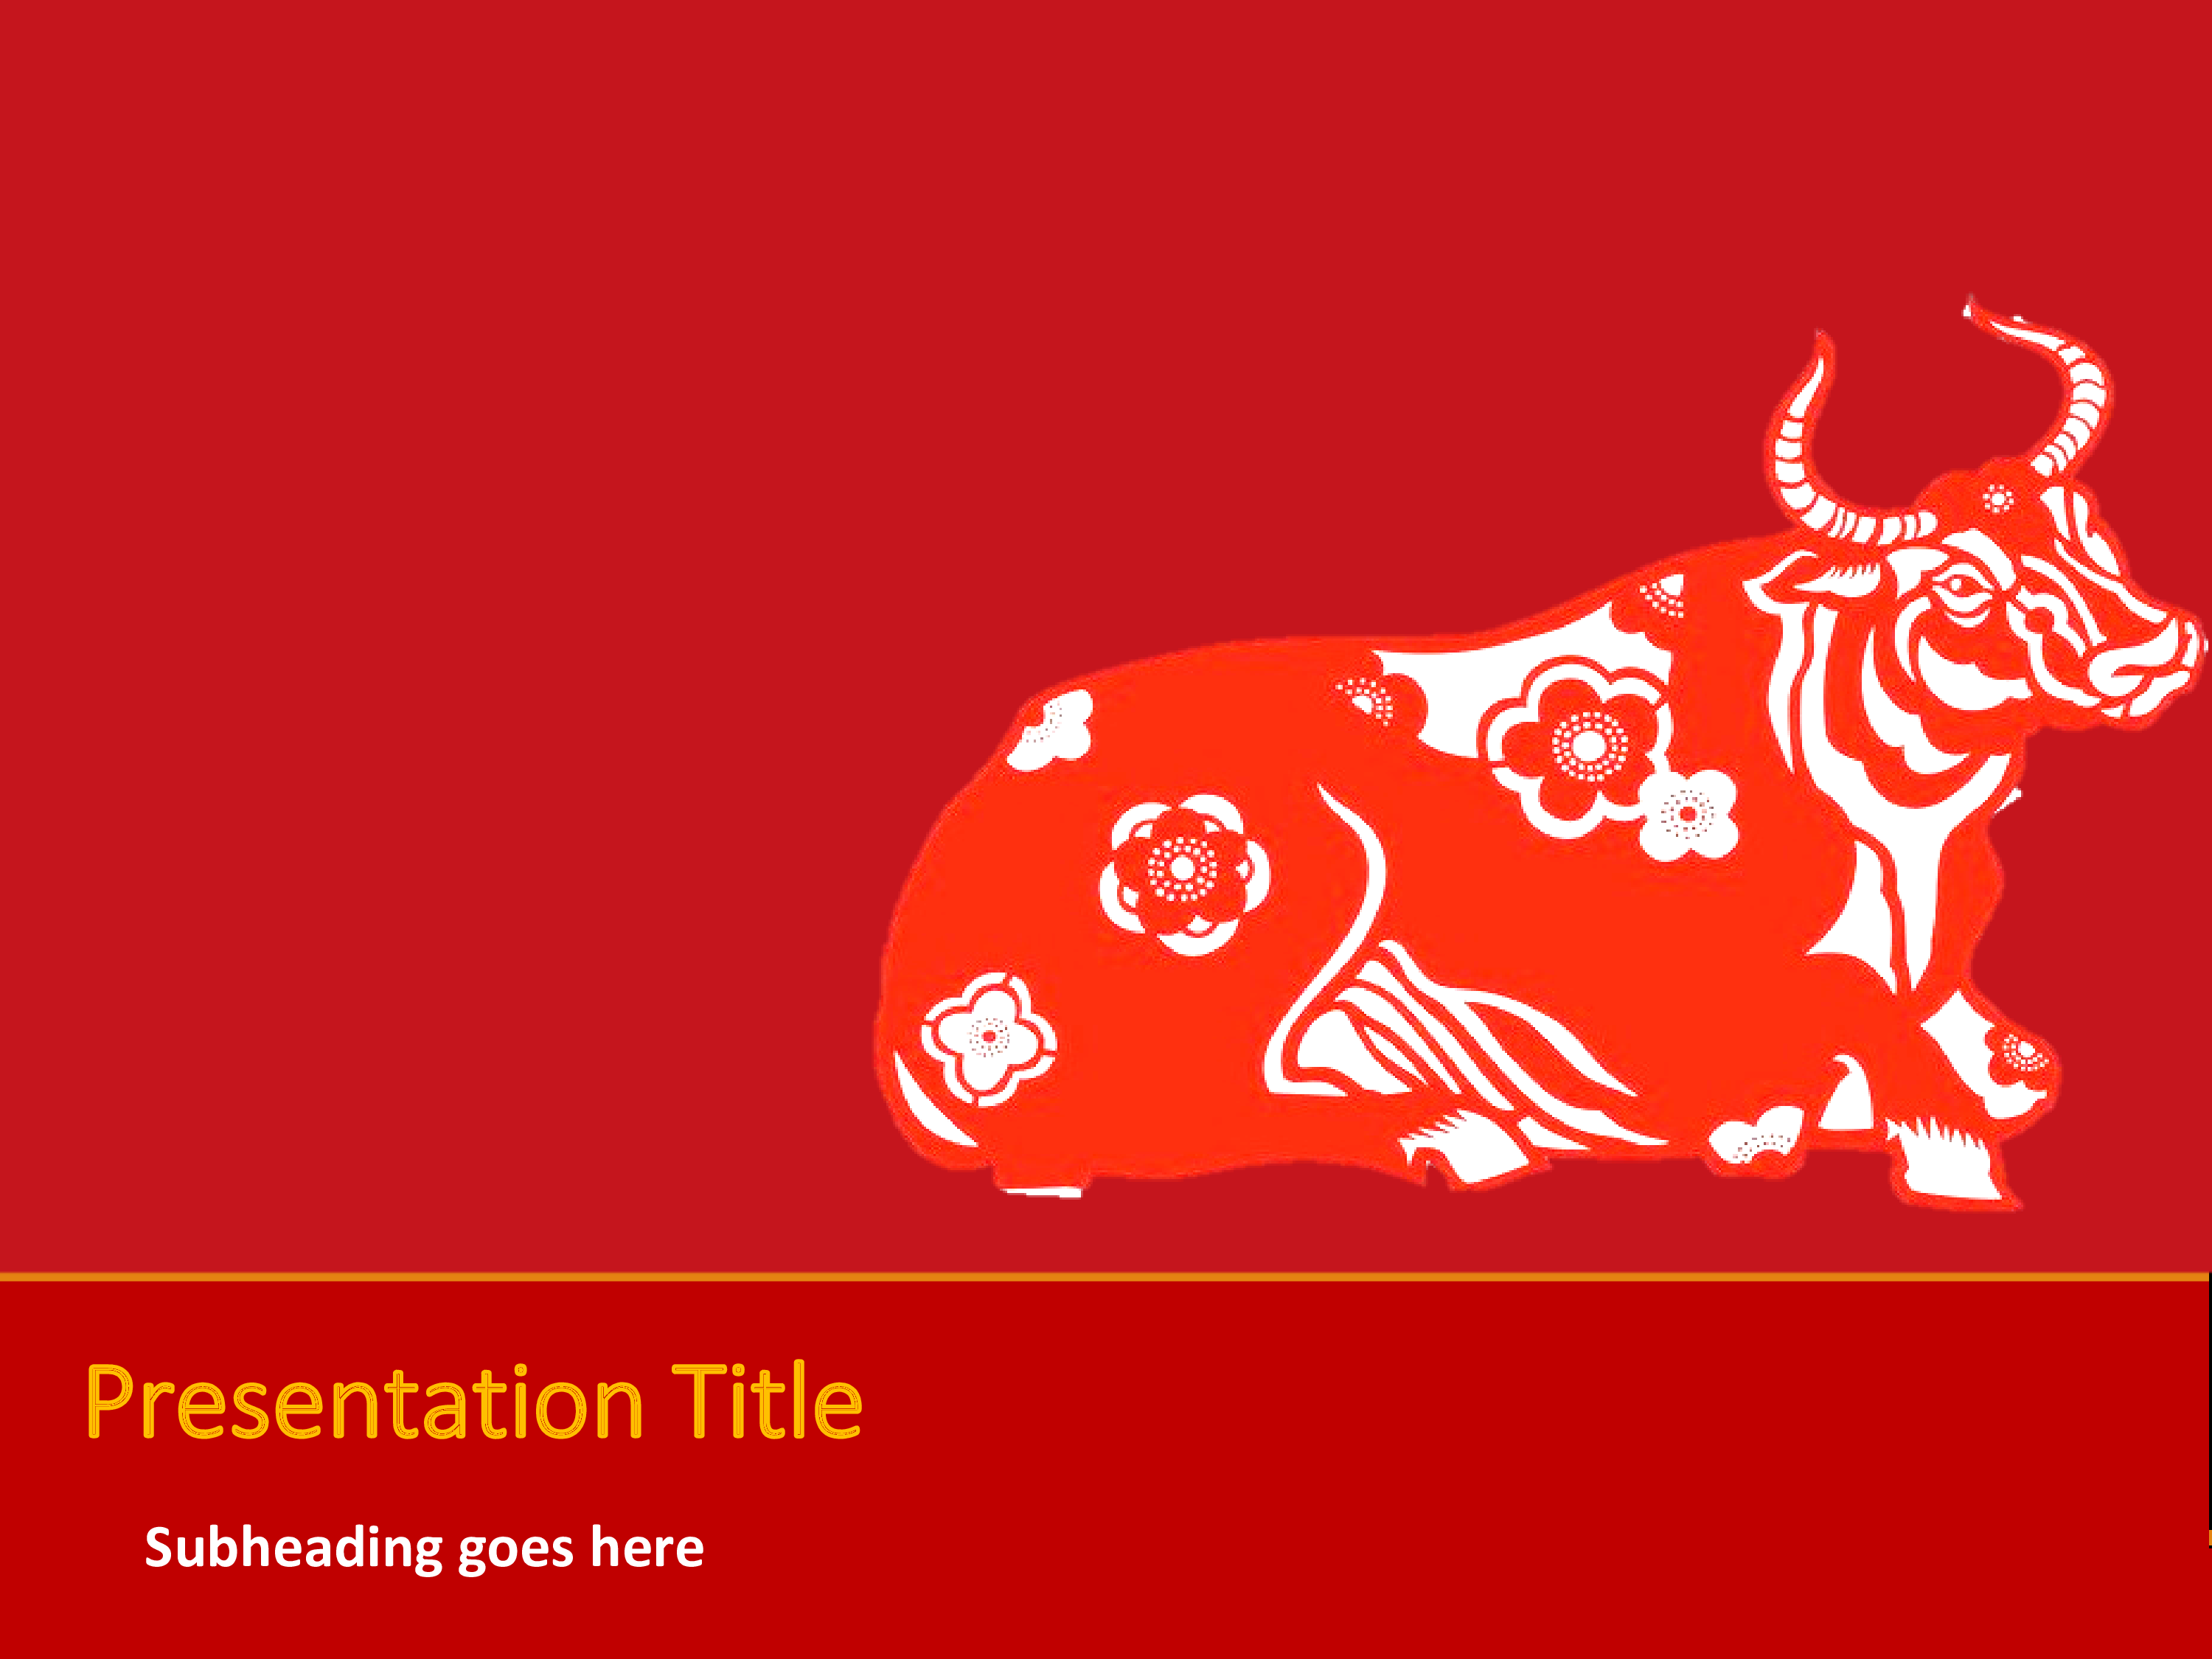 Chinese New Year 2021 Presentation | Templates at 